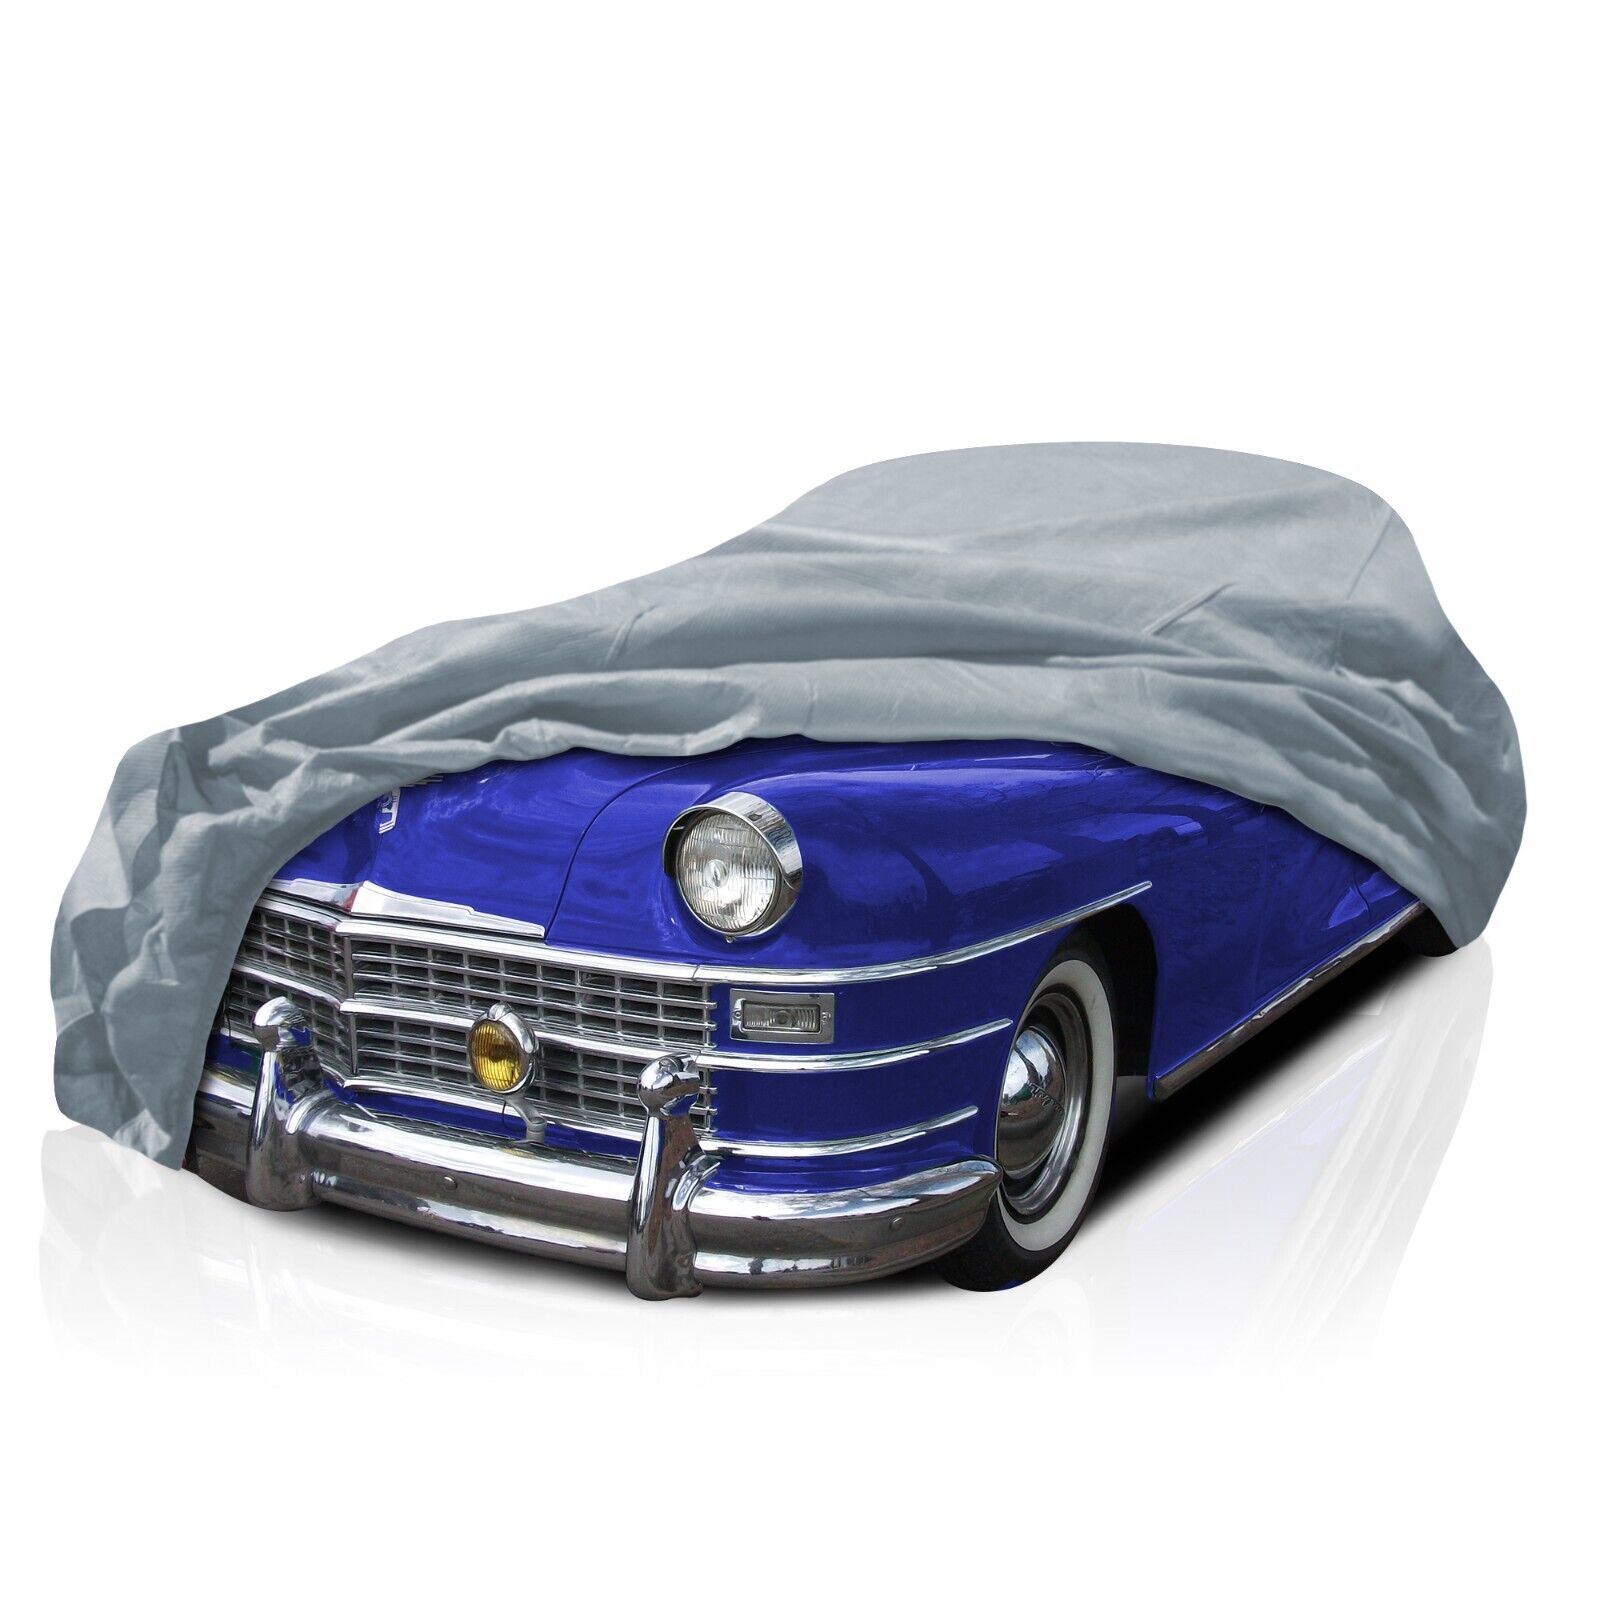 [CCT] 4 Layer Weather/Waterproof Full Car Cover For Chrysler New Yorker 39'-97'